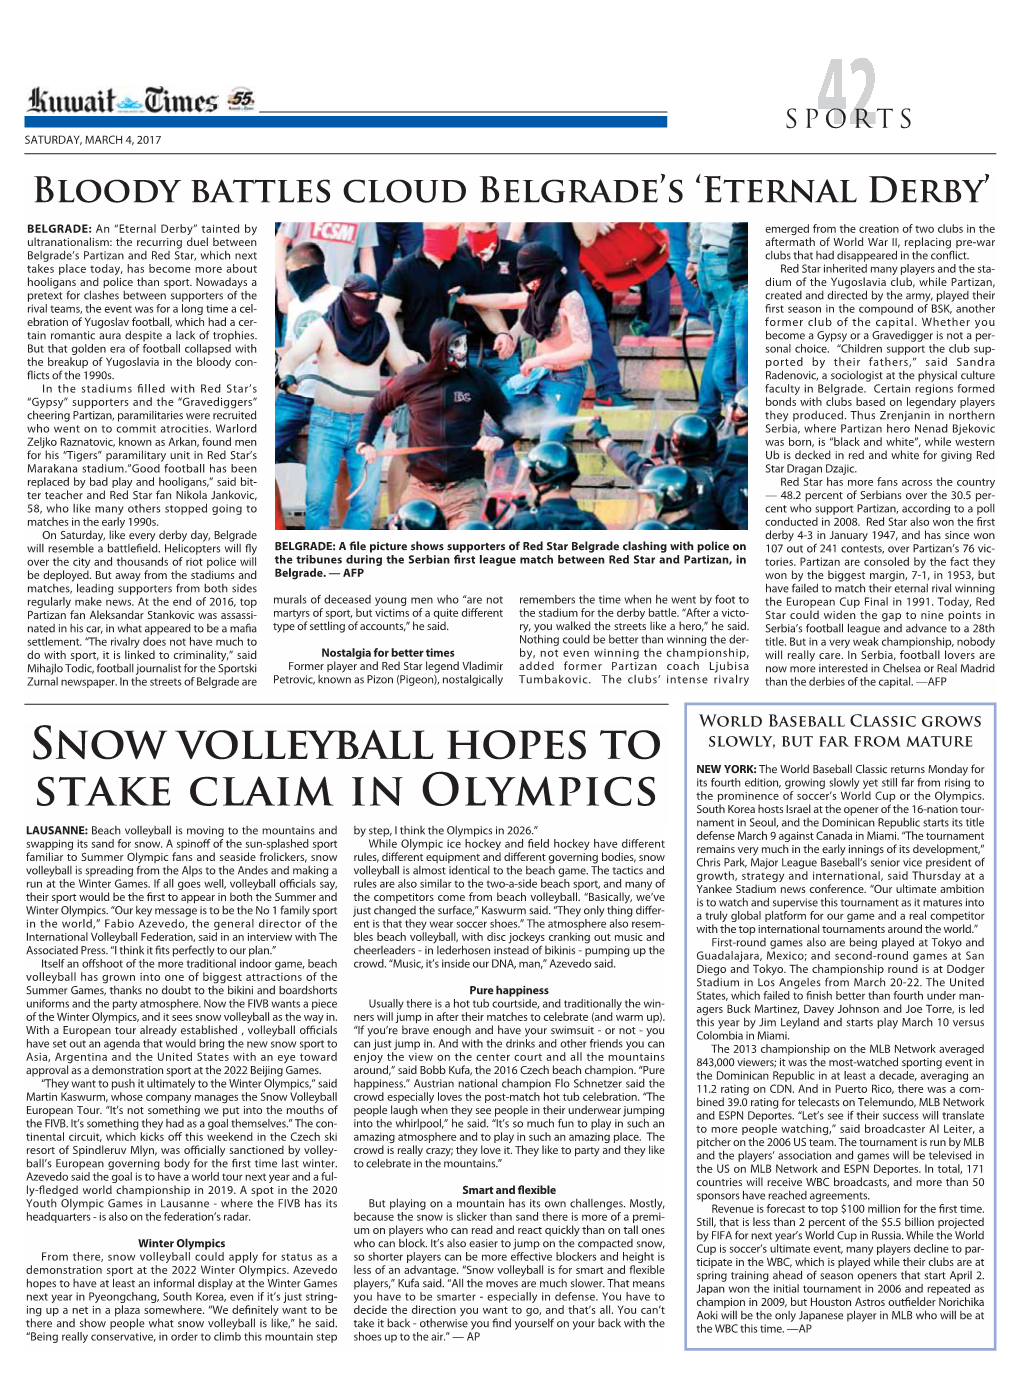 Snow Volleyball Hopes to Stake Claim in Olympics